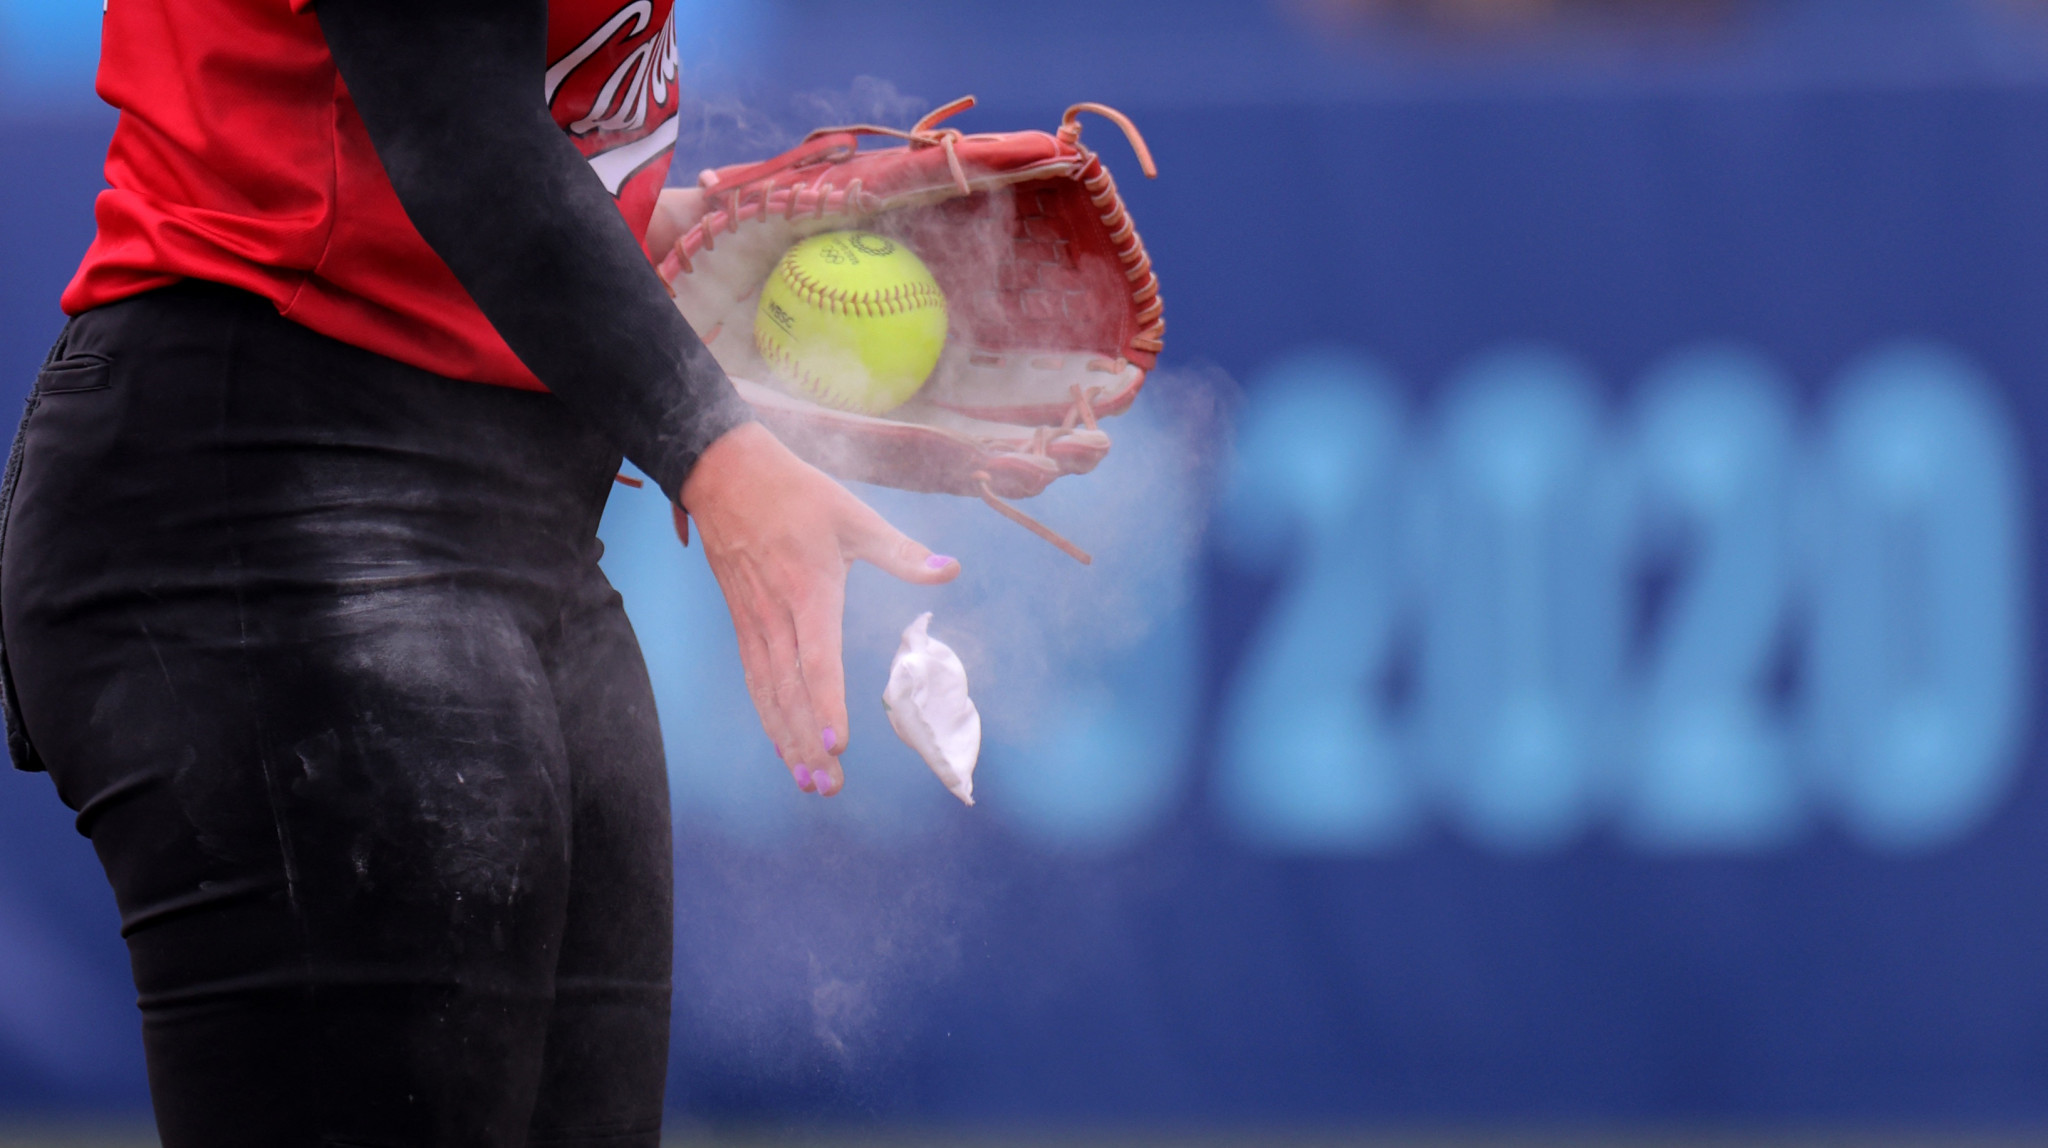 Softball Canada chief executive Mitchener to retire after 24 years in the role